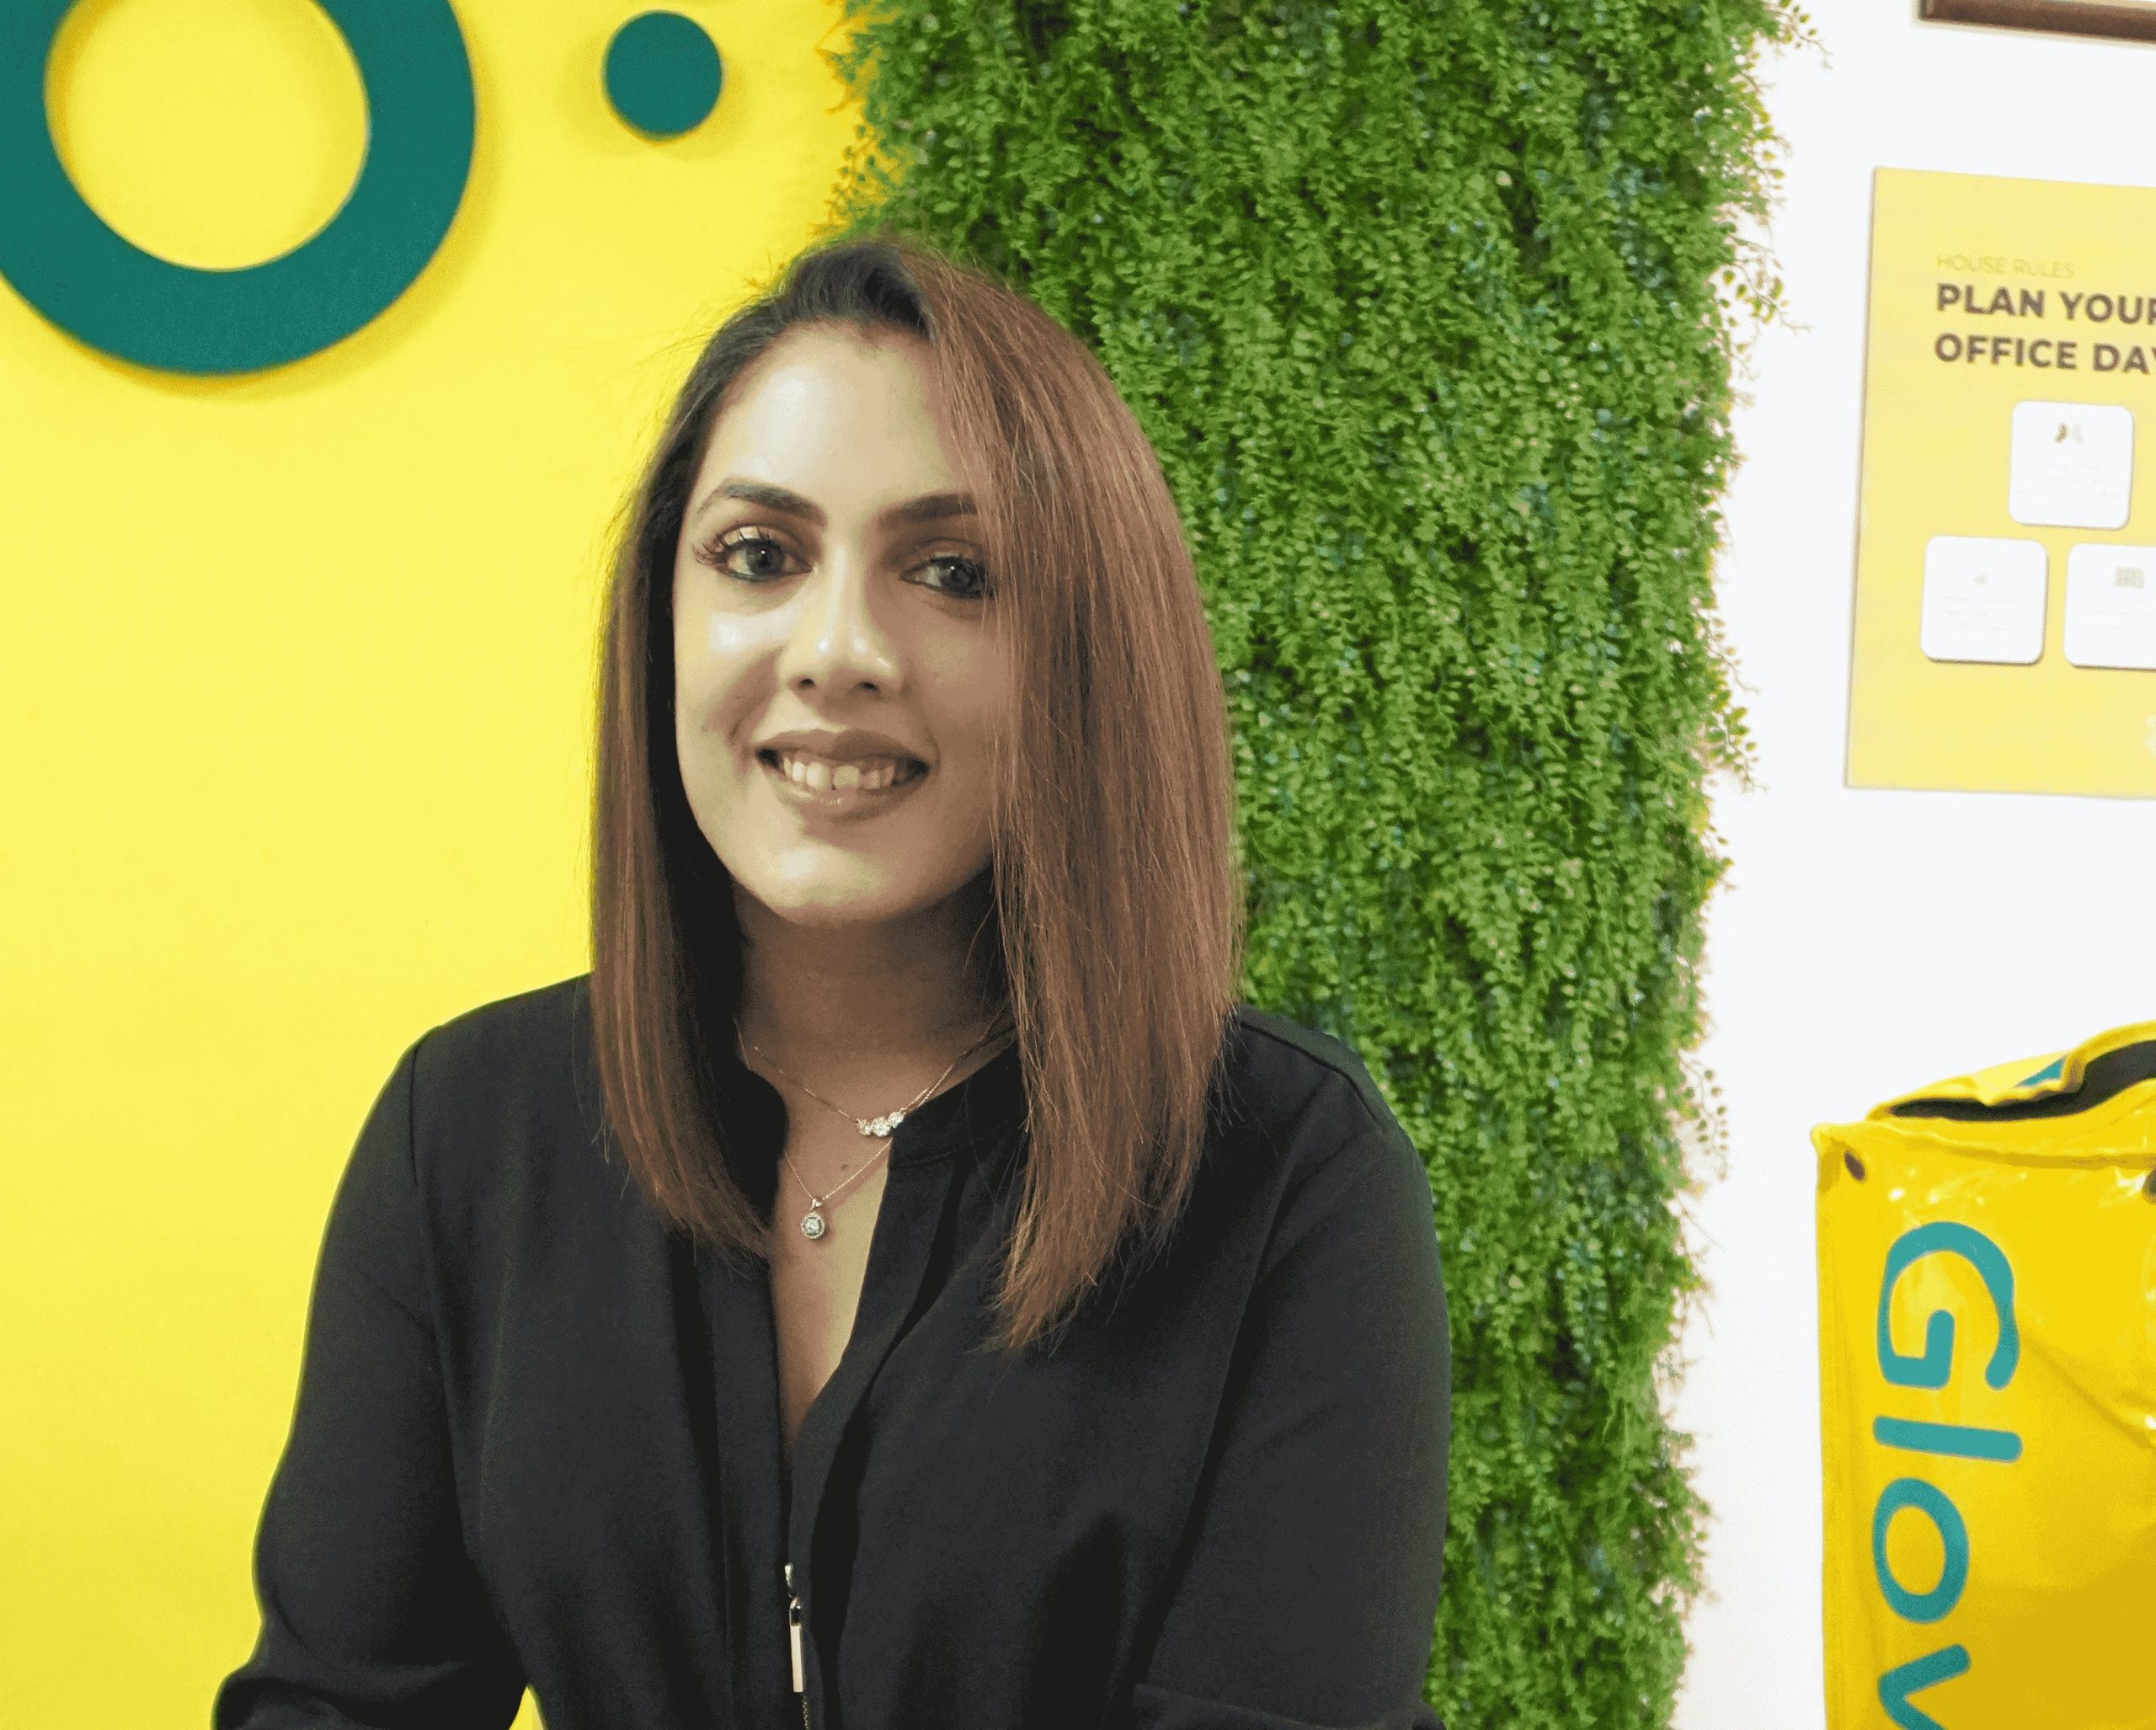 Sonali Patel Visram, the incoming Chief Comeercial Officer for Glovo Kenya.